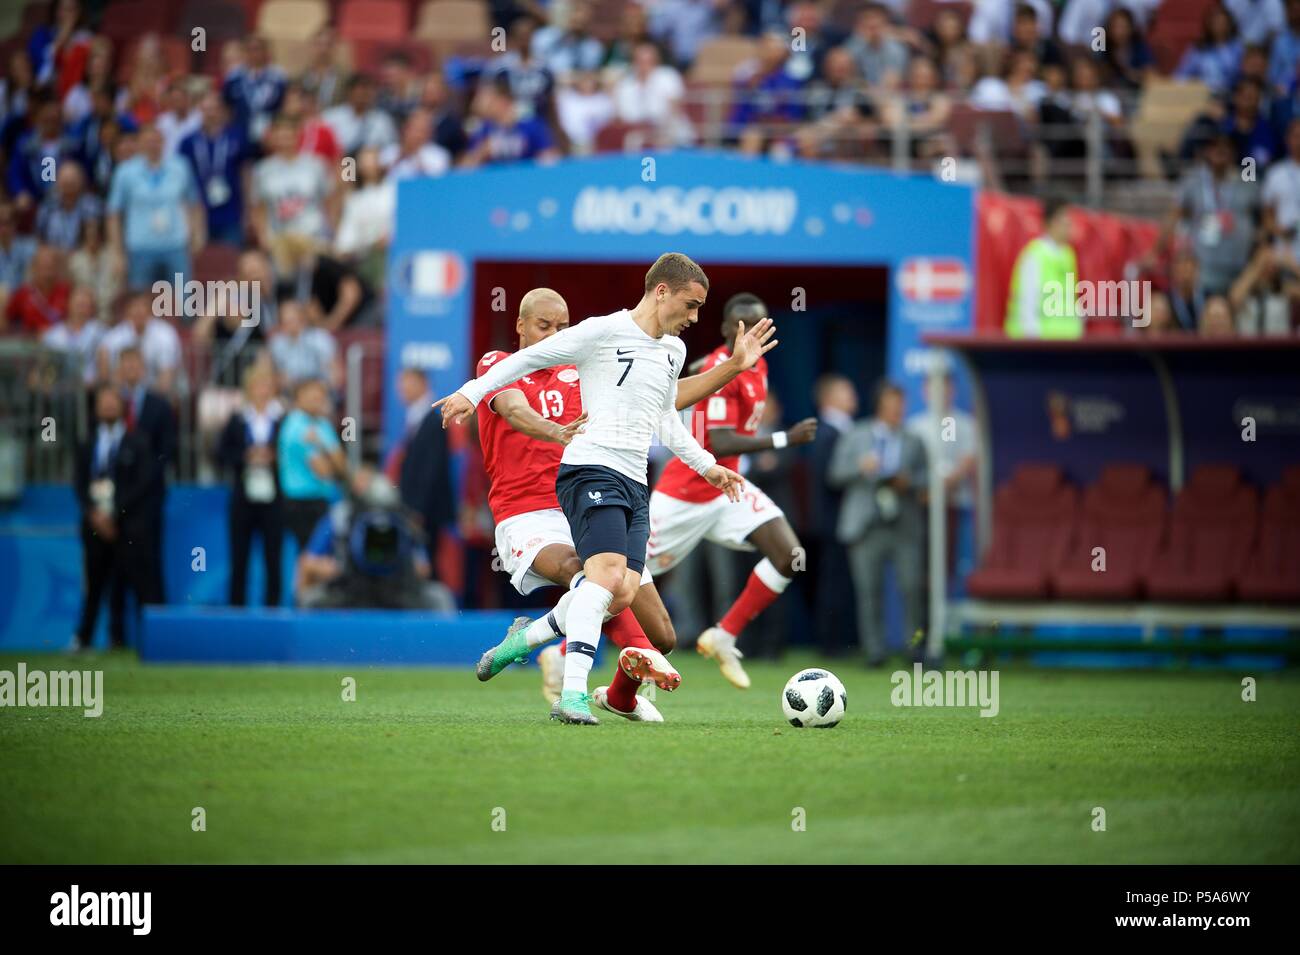 Jun 26th, 2018, Moscow, Russia. Thomas Delaney of Denmark and  Antoine Griezmann of france in action during the 2018 FIFA World Cup Russia Group C match Denmark v  France at Luzhniki  stadium, Moscow. Shoja Lak/Alamy Live News Stock Photo